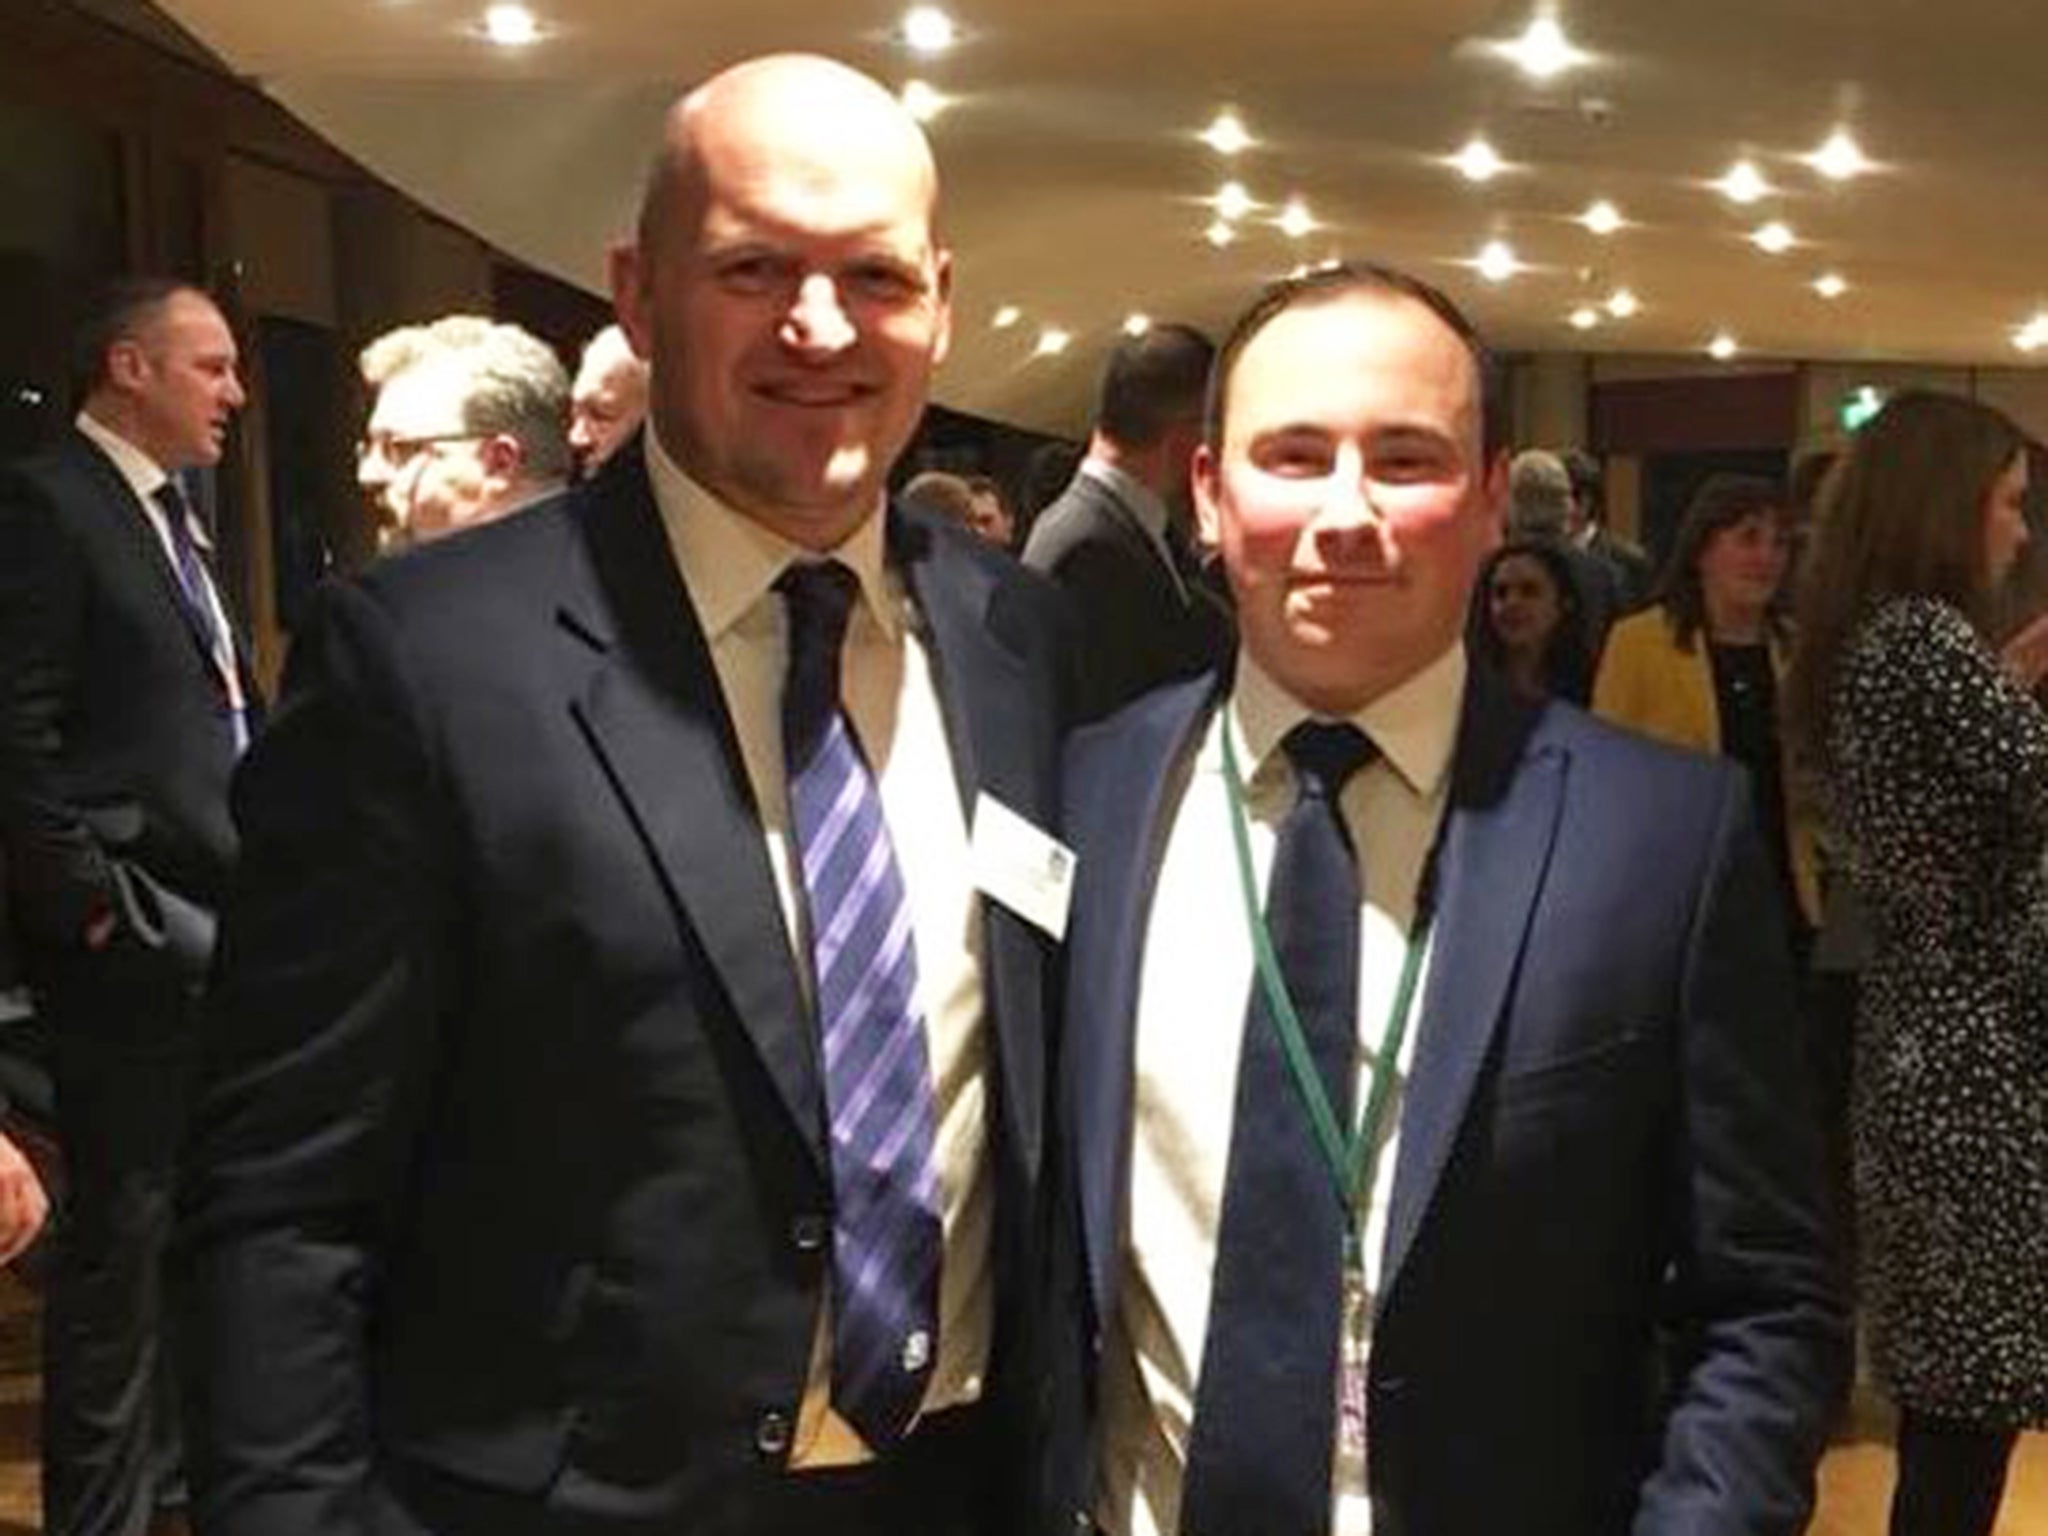 David Hill, pictured right with Scotland rugby coach Gregor Townsend, died playing for Holyrood RFC in Dublin on Saturday